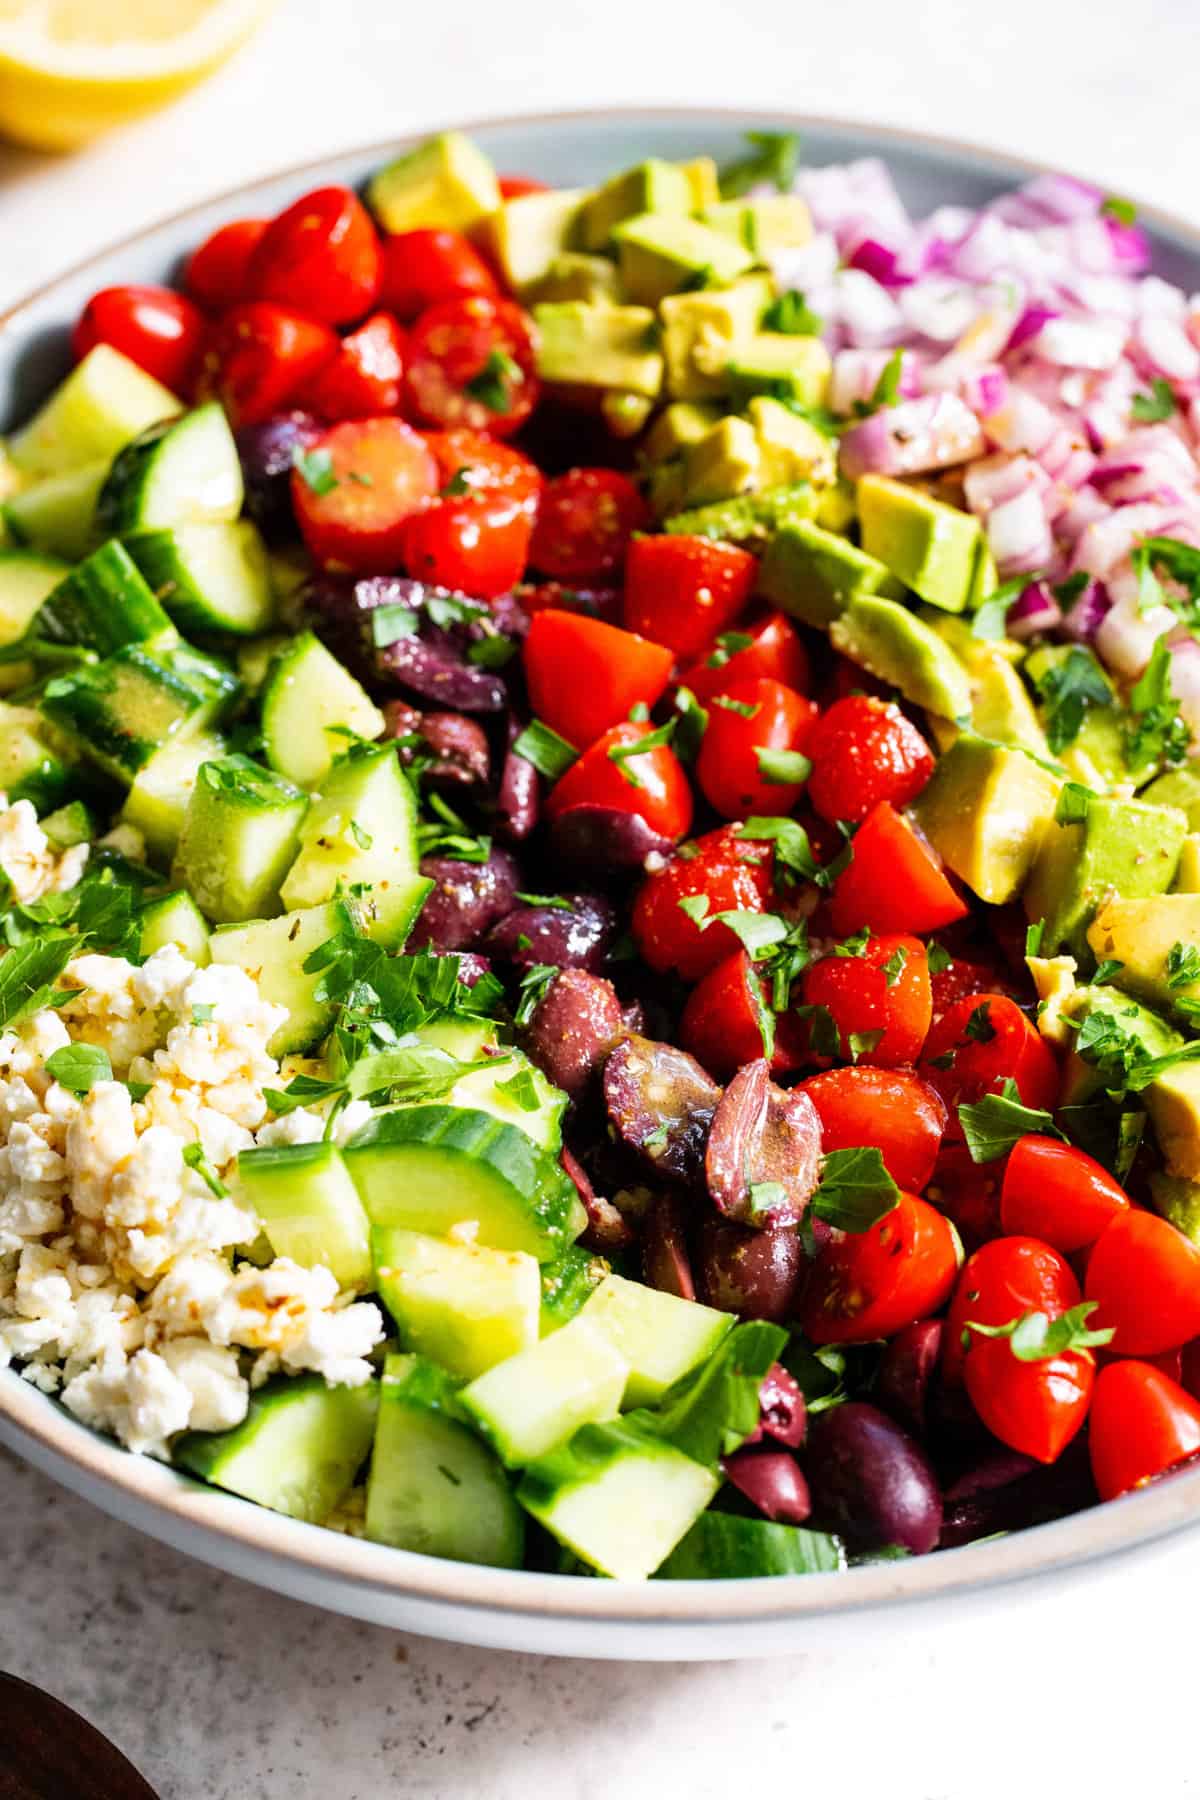 This mediterranean chopped salad has loads of veggies, a flavor packed vinaigrette and vegan feta cheese. It’s perfect to serve to guests, for BBQs, picnics or a light lunch. Make it a full meal by topping with chopped chicken or other protein. Paleo and vegan